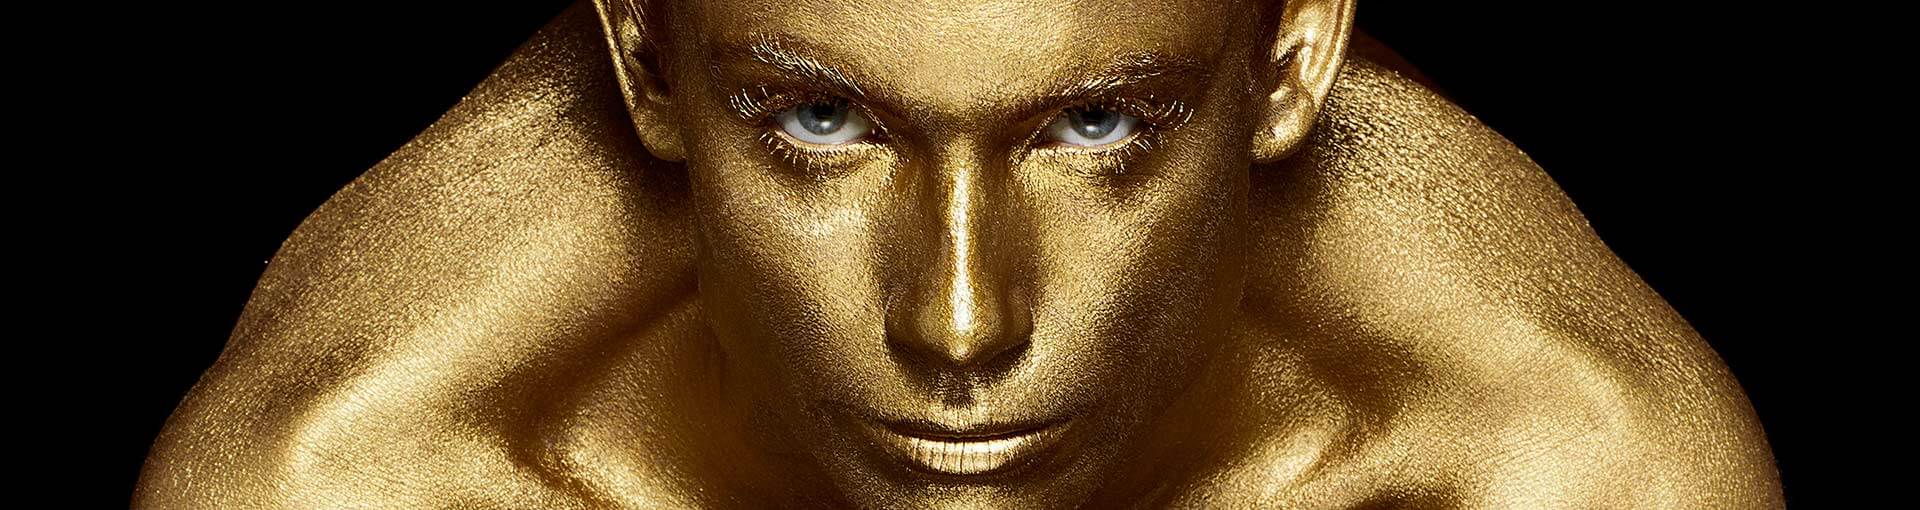 Gold face